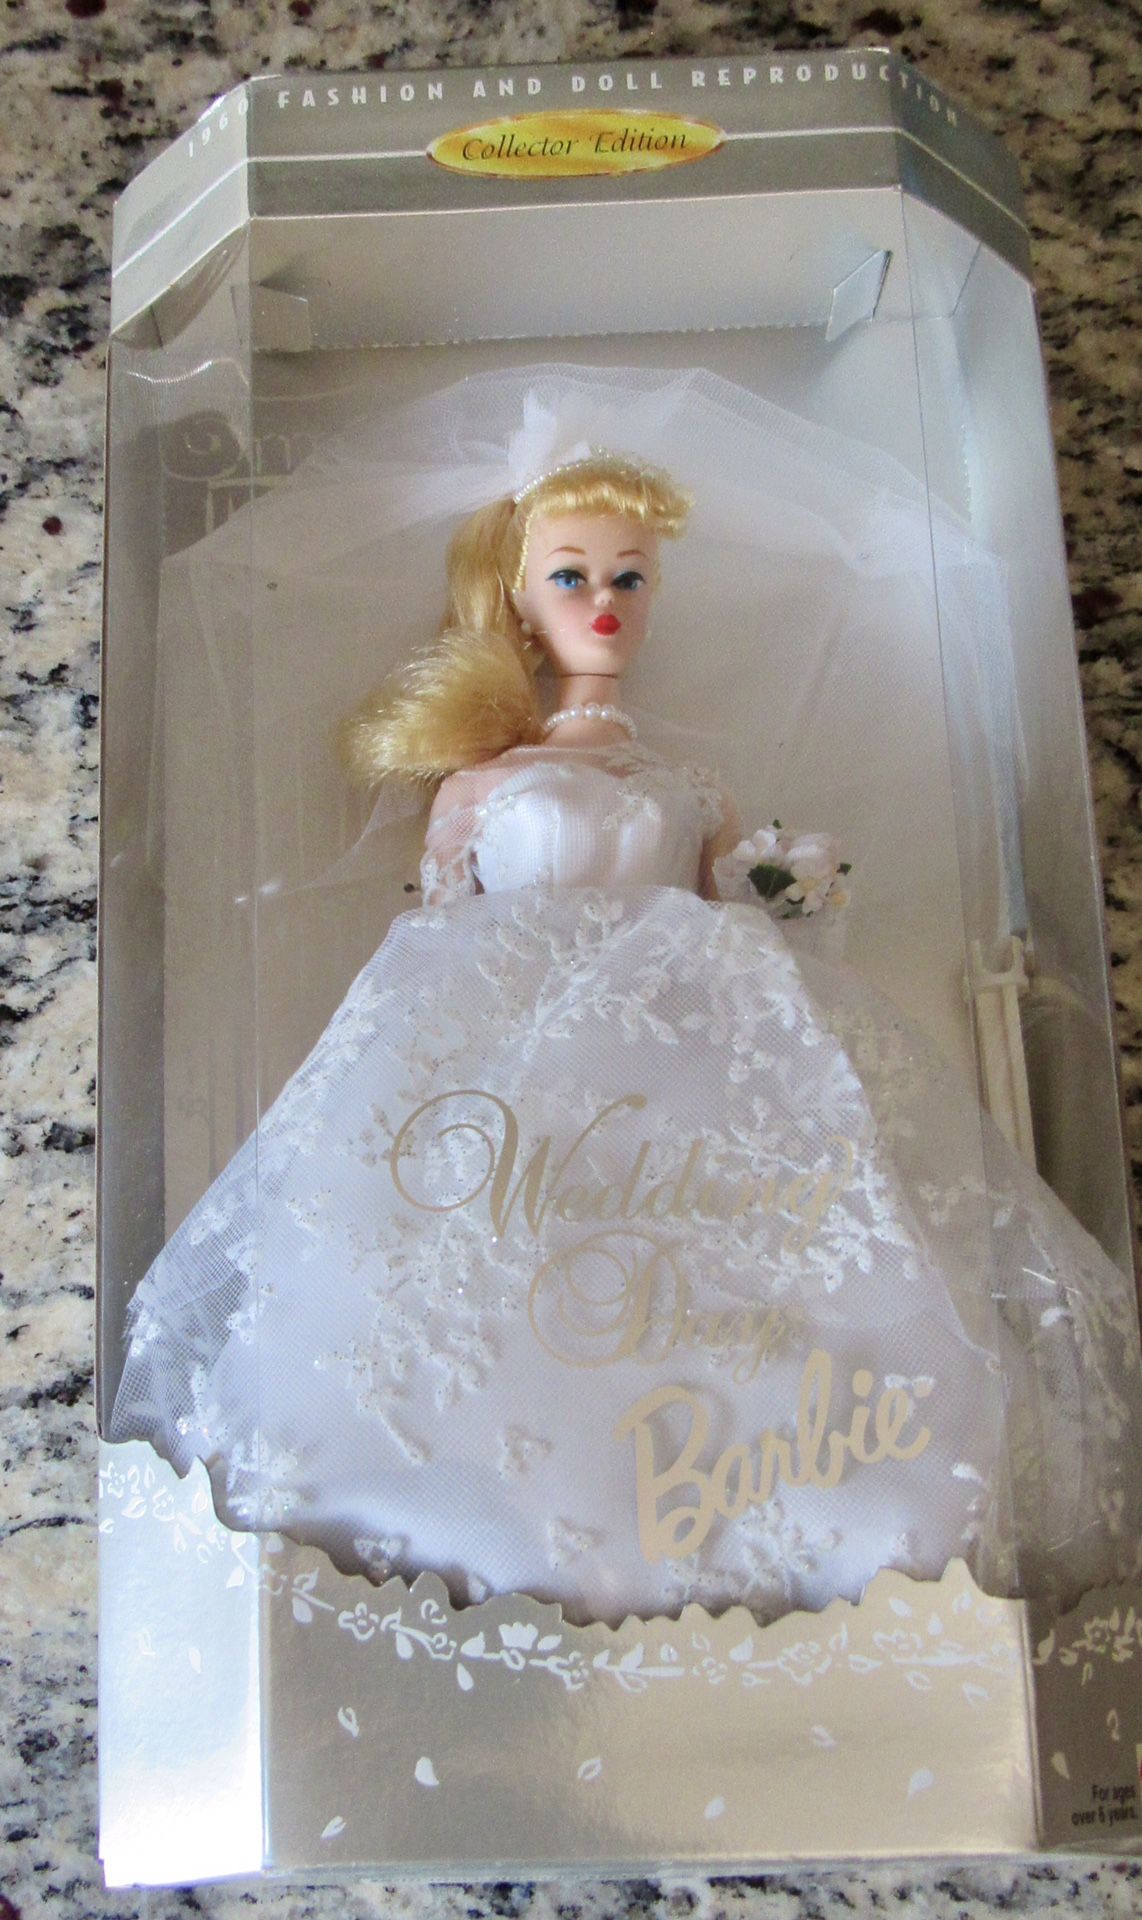 Barbie collectors. Make offers.